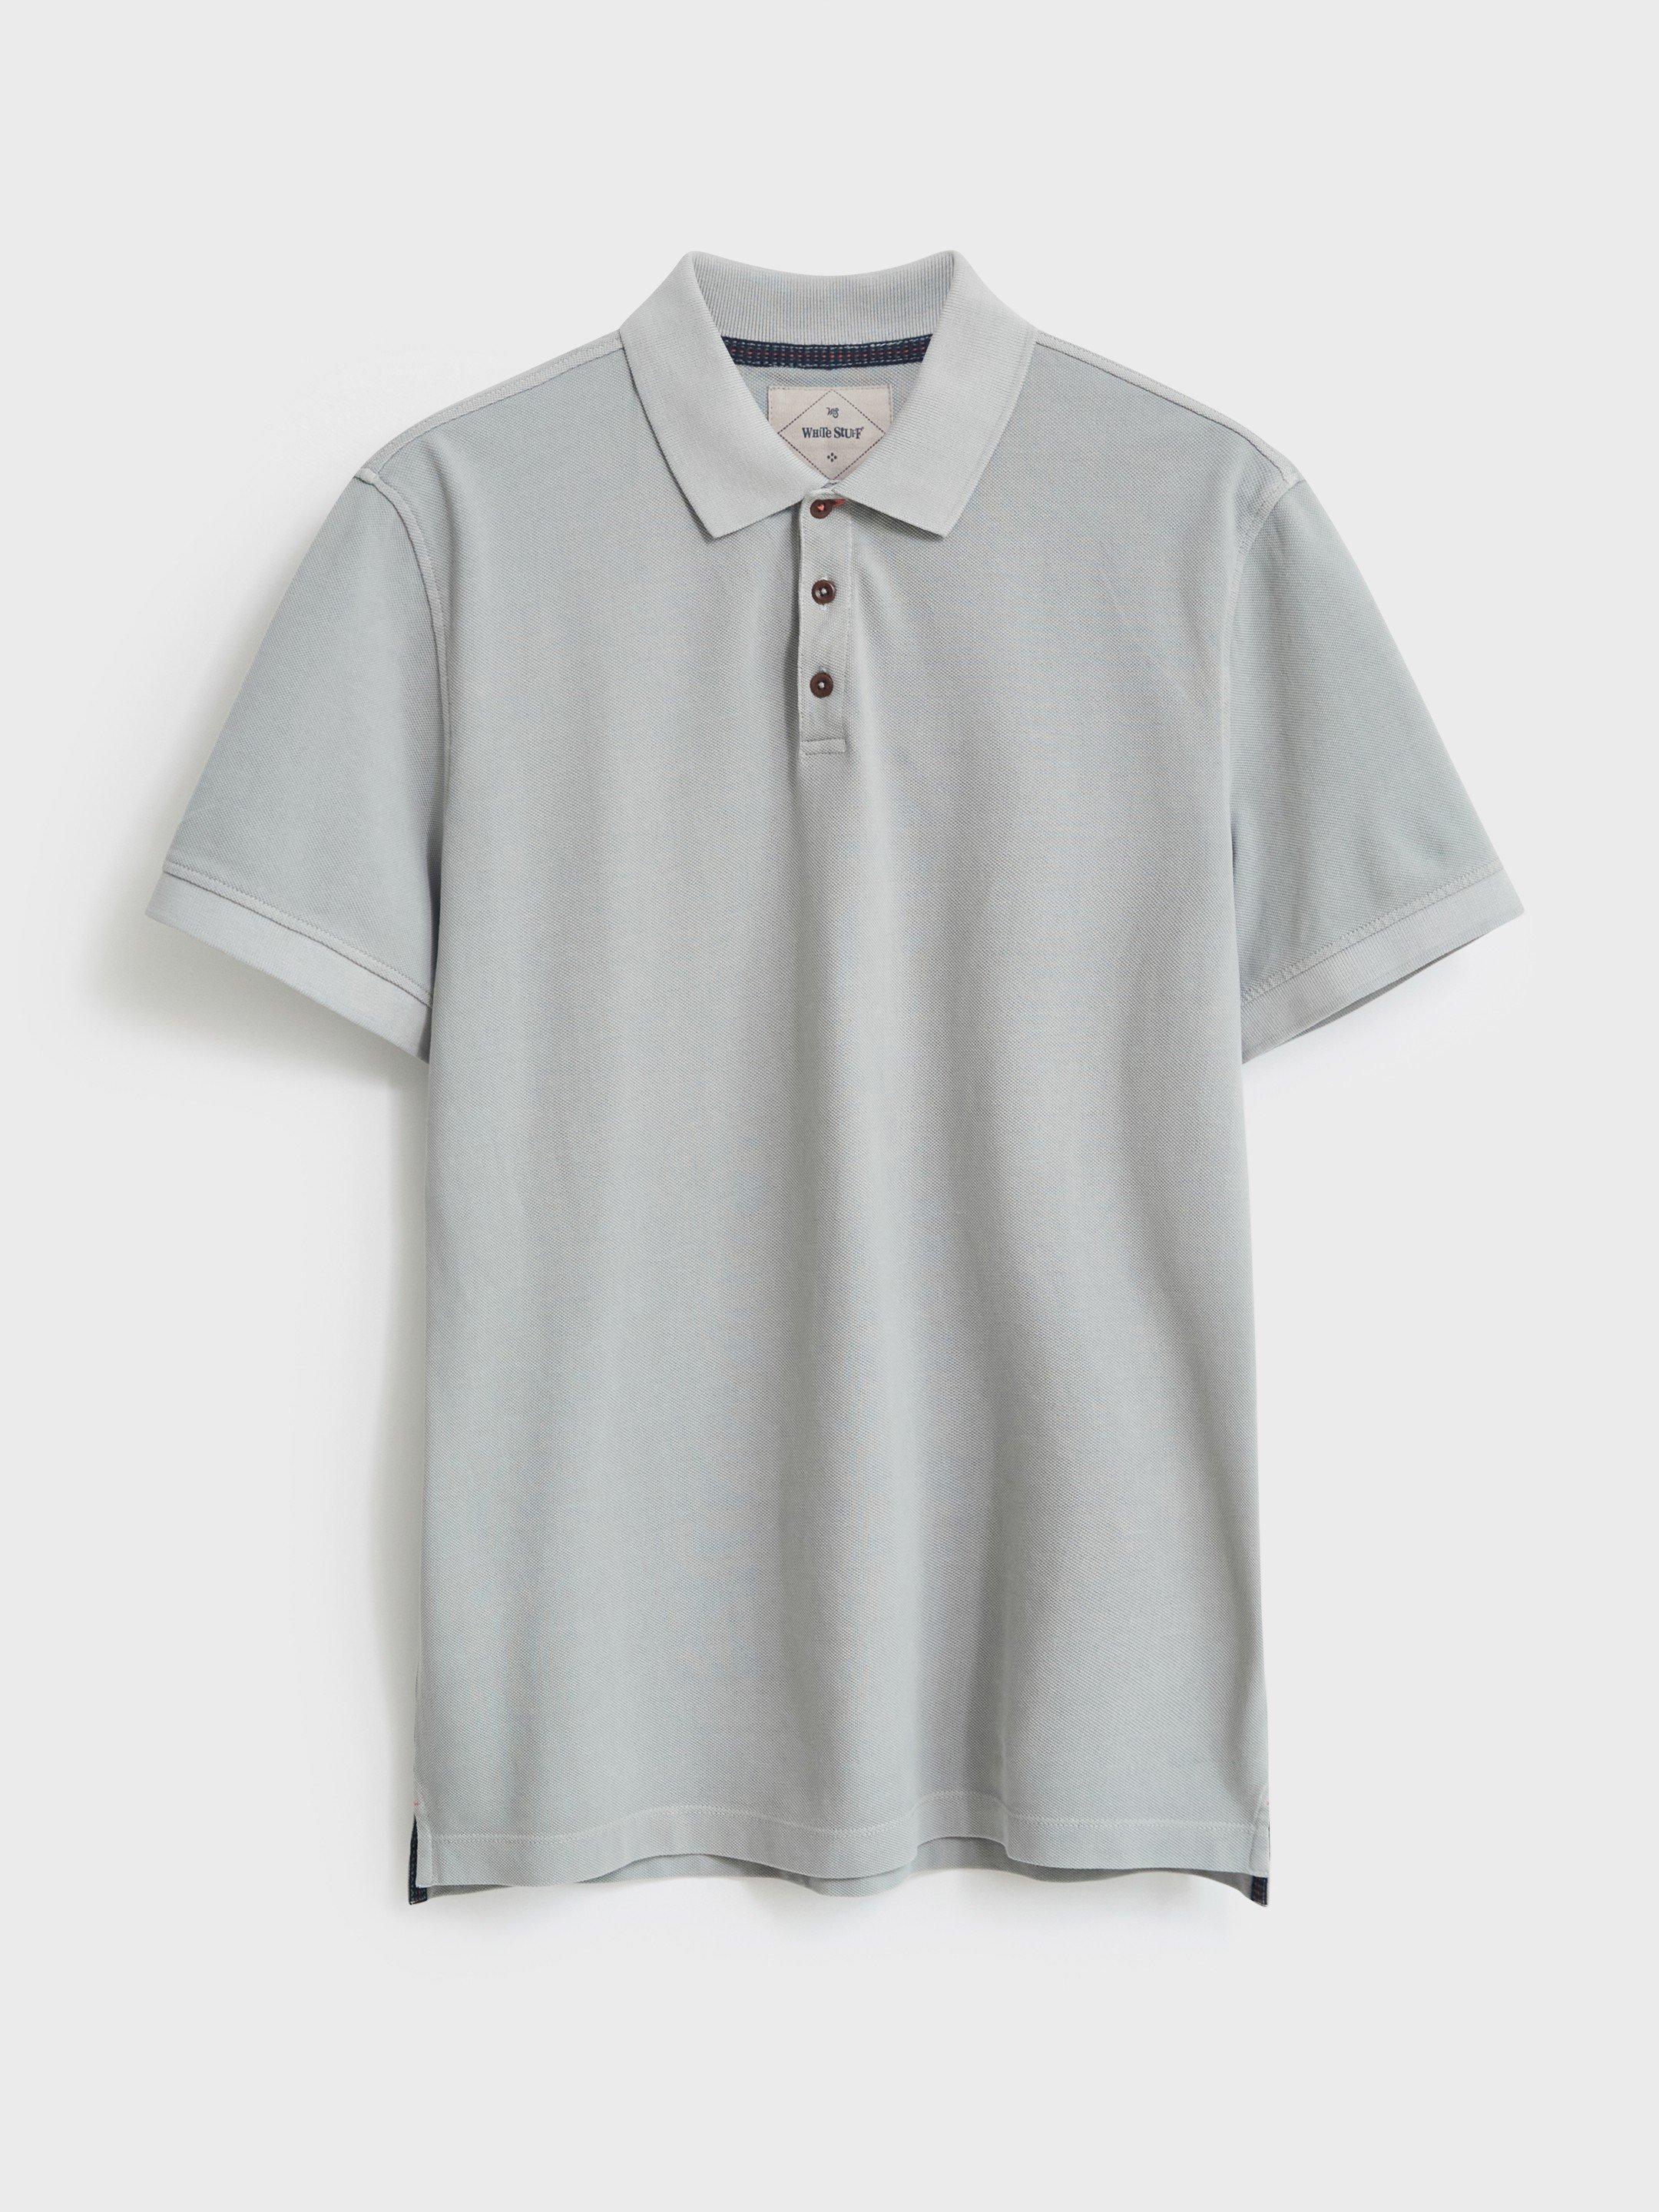 Utility Polo in LGT GREY - FLAT FRONT